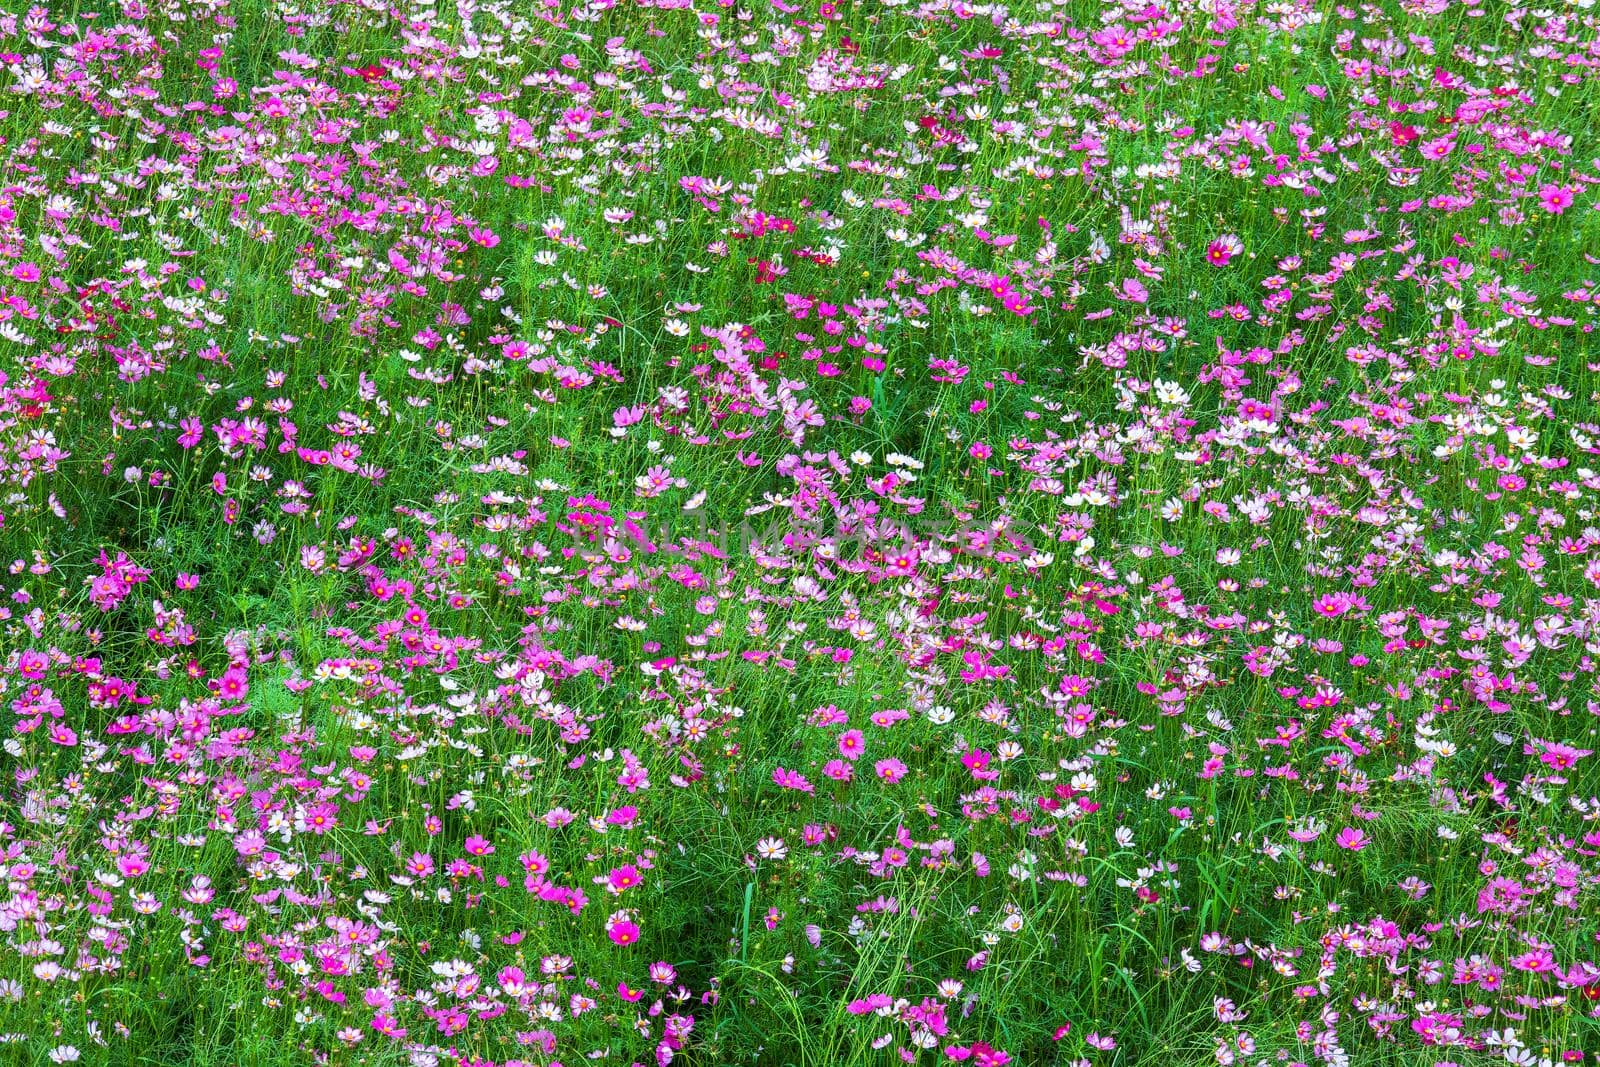 field pink flowers cosmos bloom beautifully in the garden.